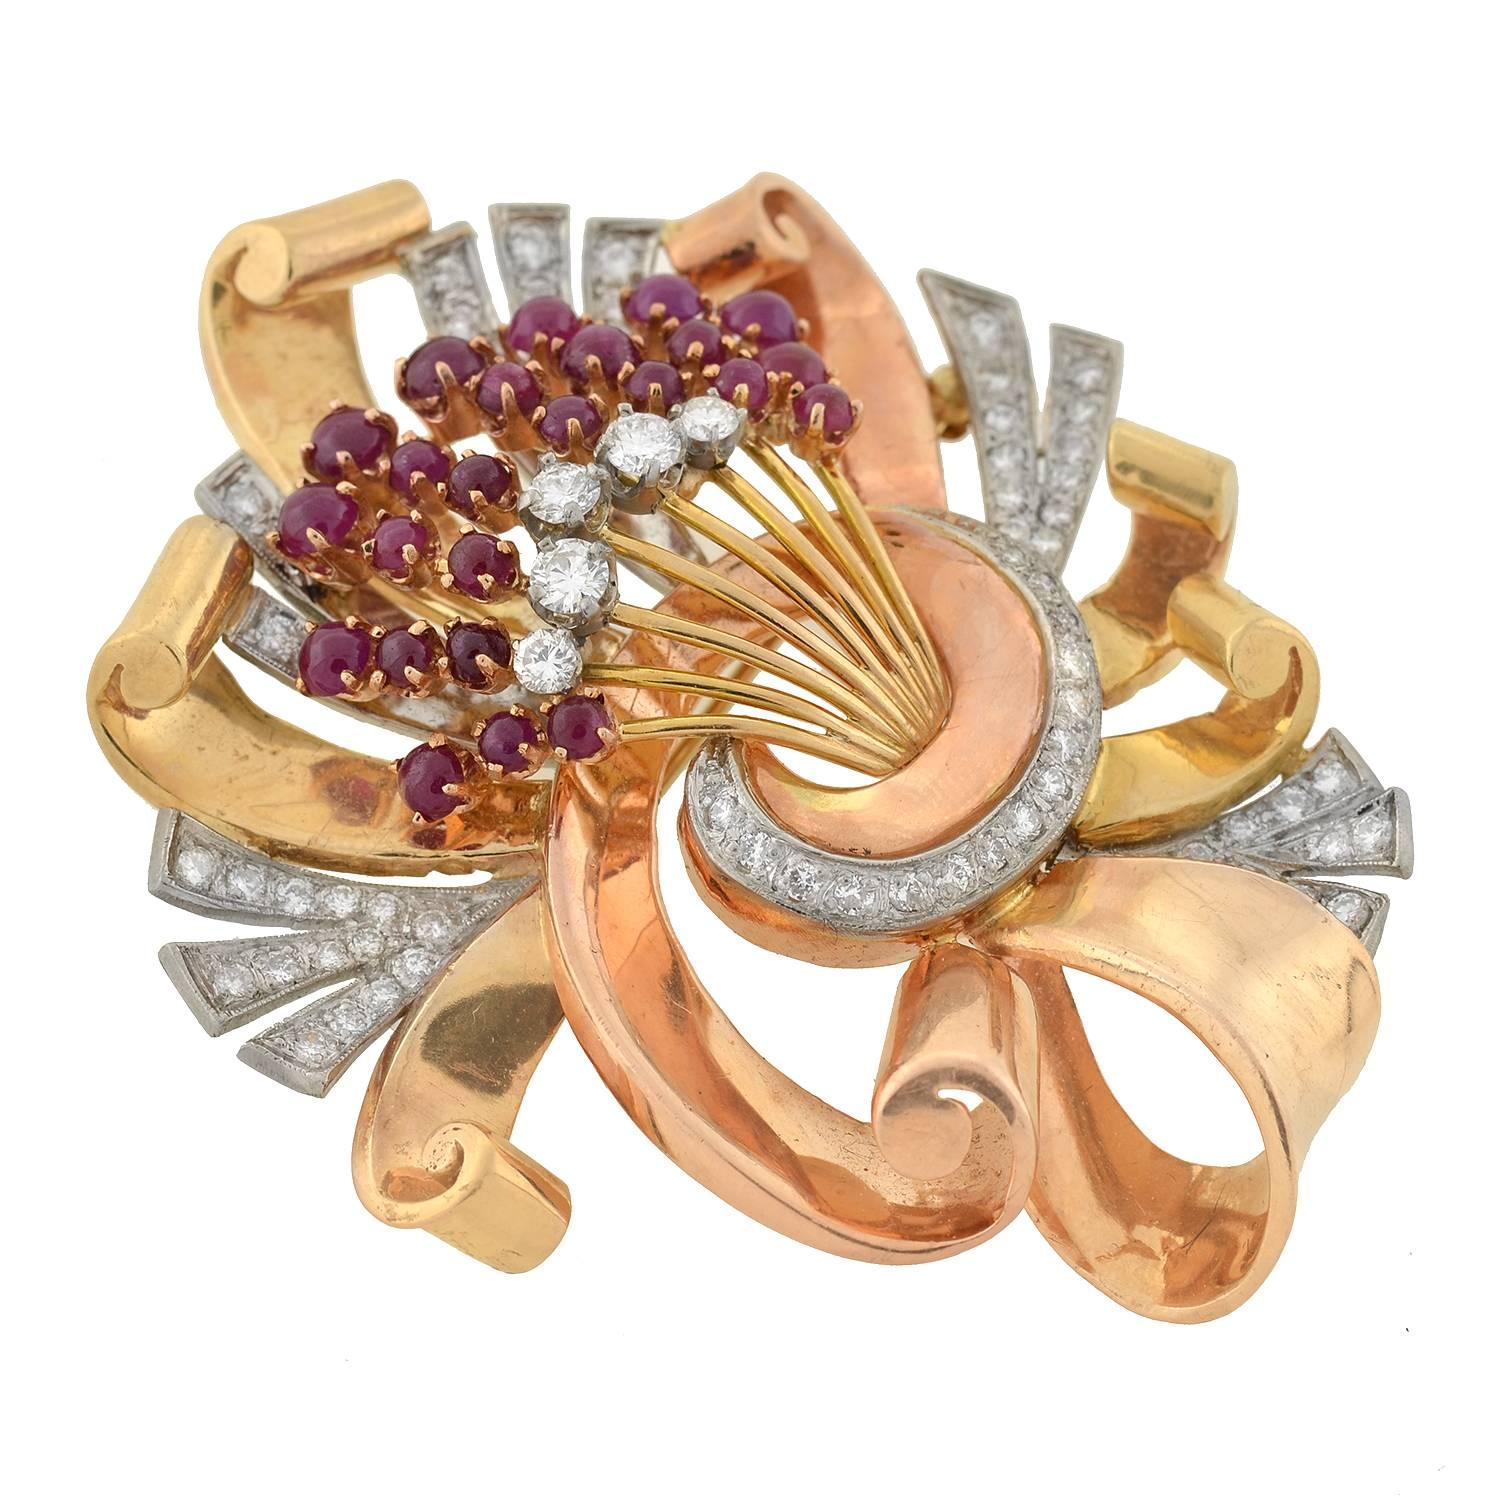 A magnificent bouquet brooch from the Retro (ca1940s) era! This outstanding mixed metals piece is very substantial in size, and features an array of luscious rubies and sparkling diamonds. The tri-tone design is crafted in 18kt yellow gold, 18kt